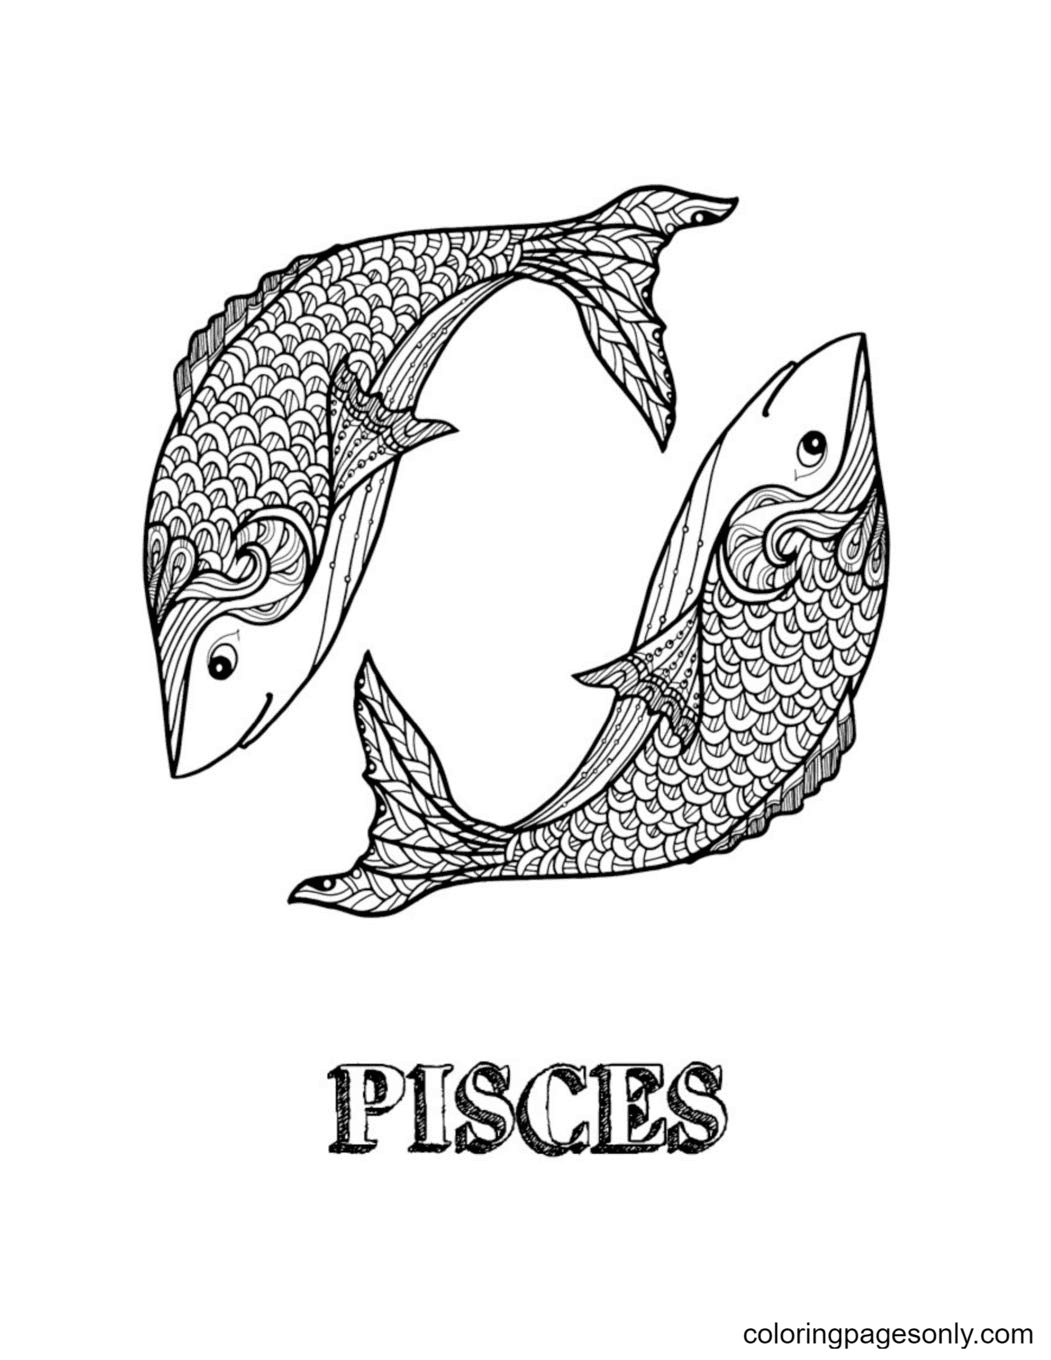 Pisces Free Coloring Page